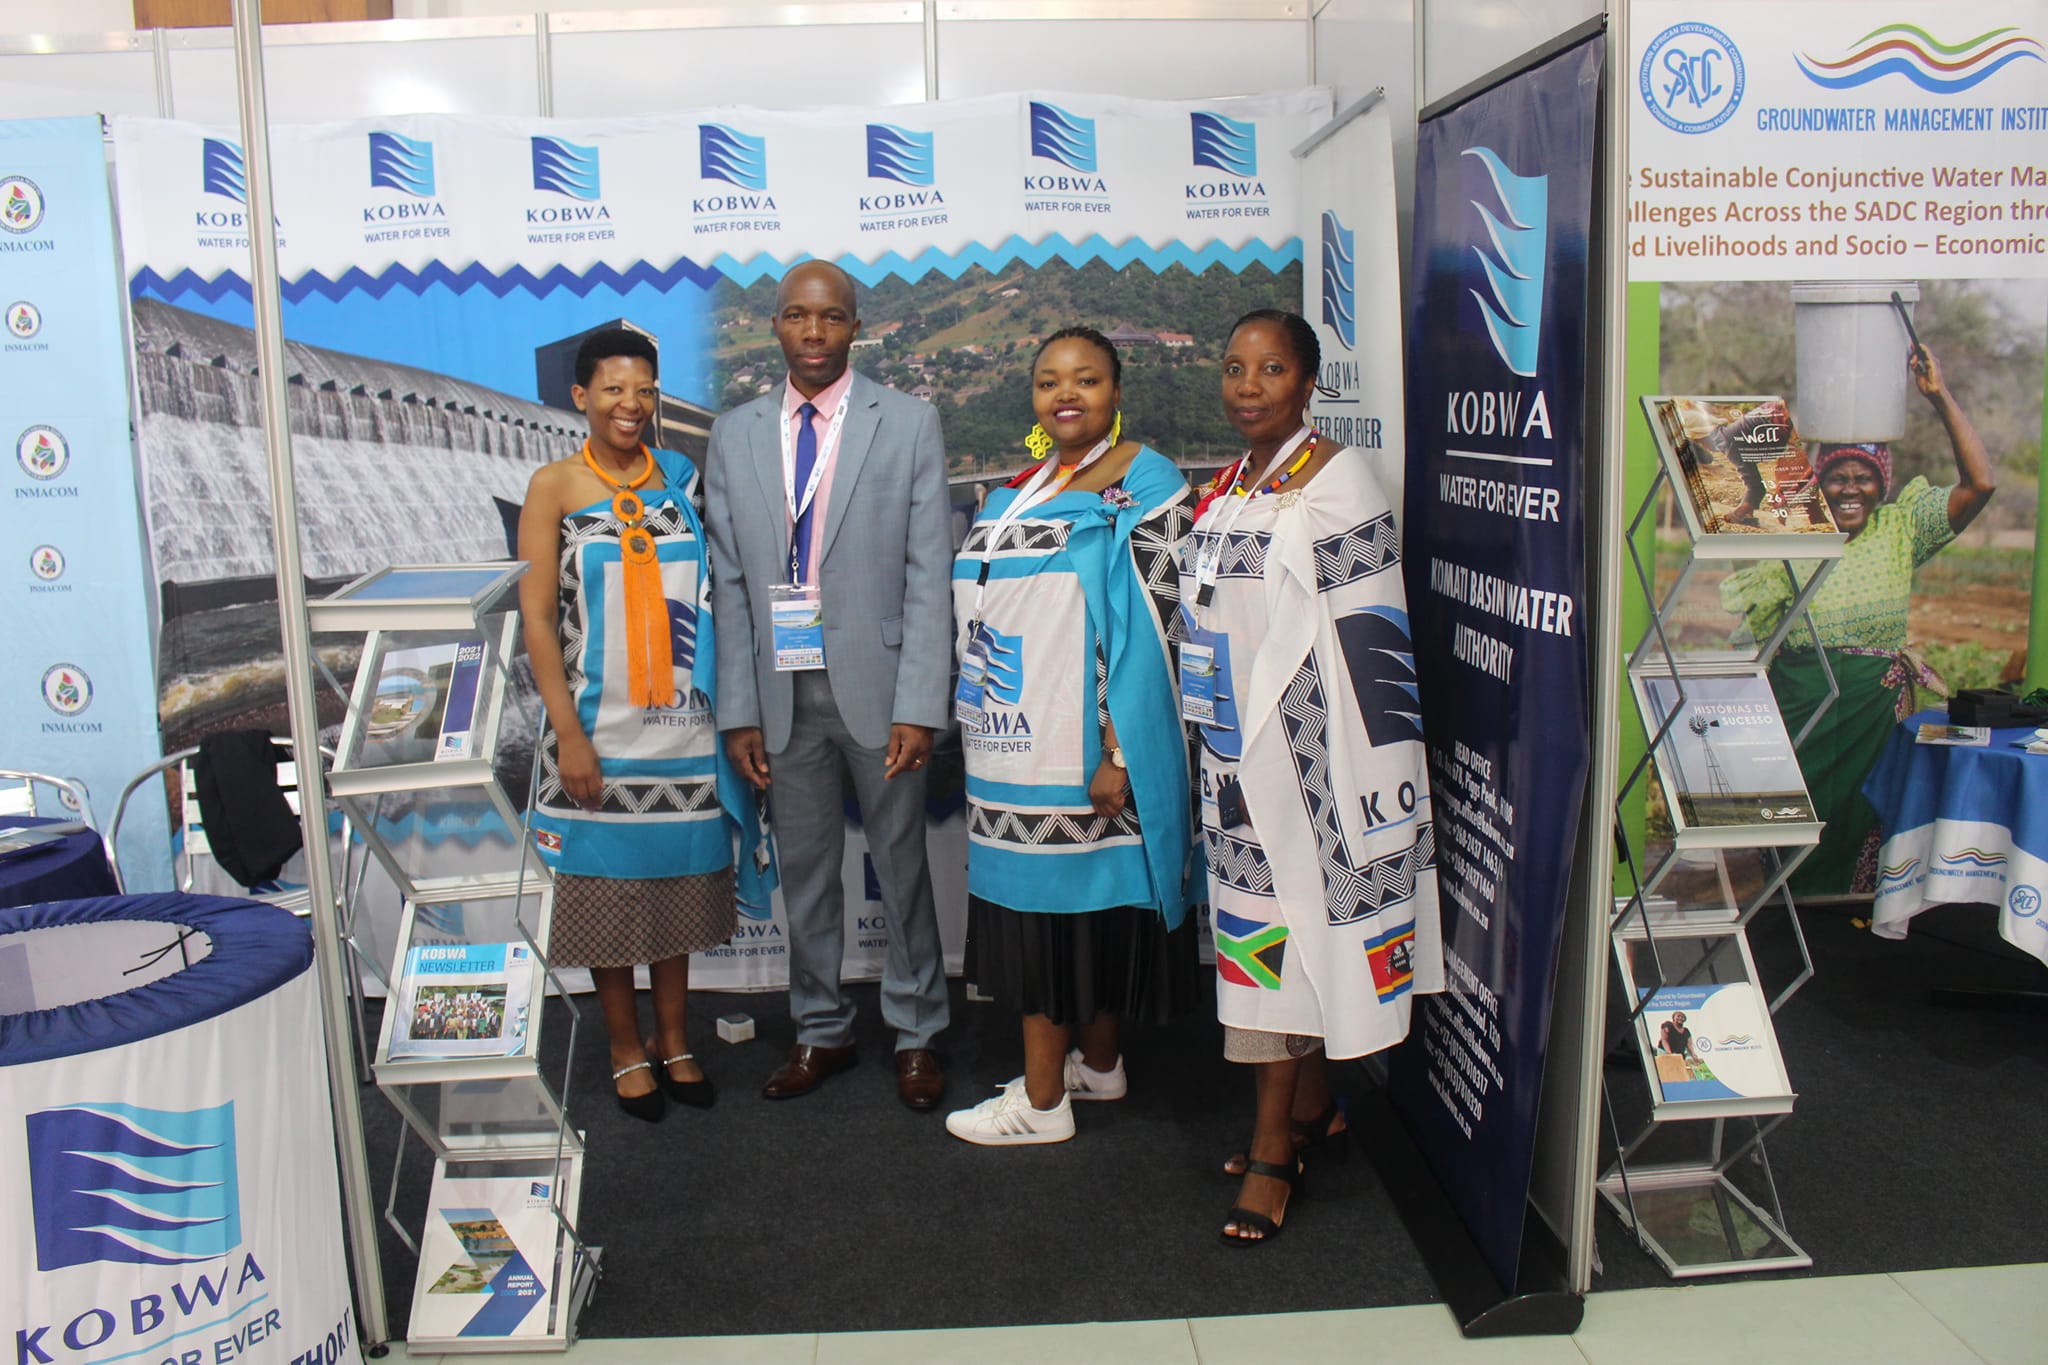 KOBWA participated in the 10th SADC River Basin Organisations image